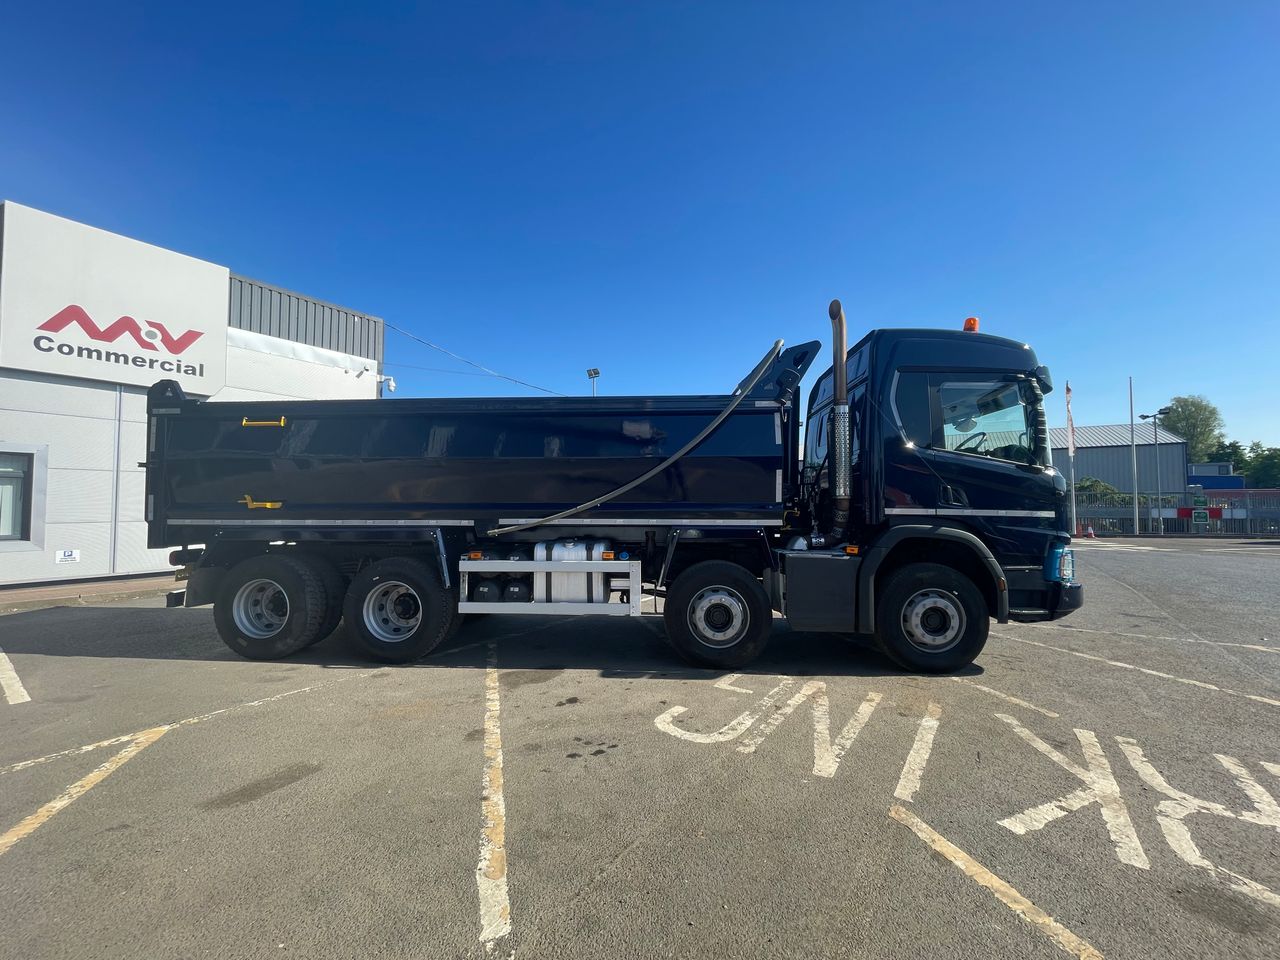 Ready to go Scania P410 XT, Tipper, 410, 32 Tonne, Day Cab, Automatic, Thompson Body with Easy Sheet, Beacons, High Ground Clearance, HYVA Ram, Air Tailgate, , -, - | for sale at MV Commercial, the UKs leading Truck, Trailers and Van supplier. (SM19BYL 348994)